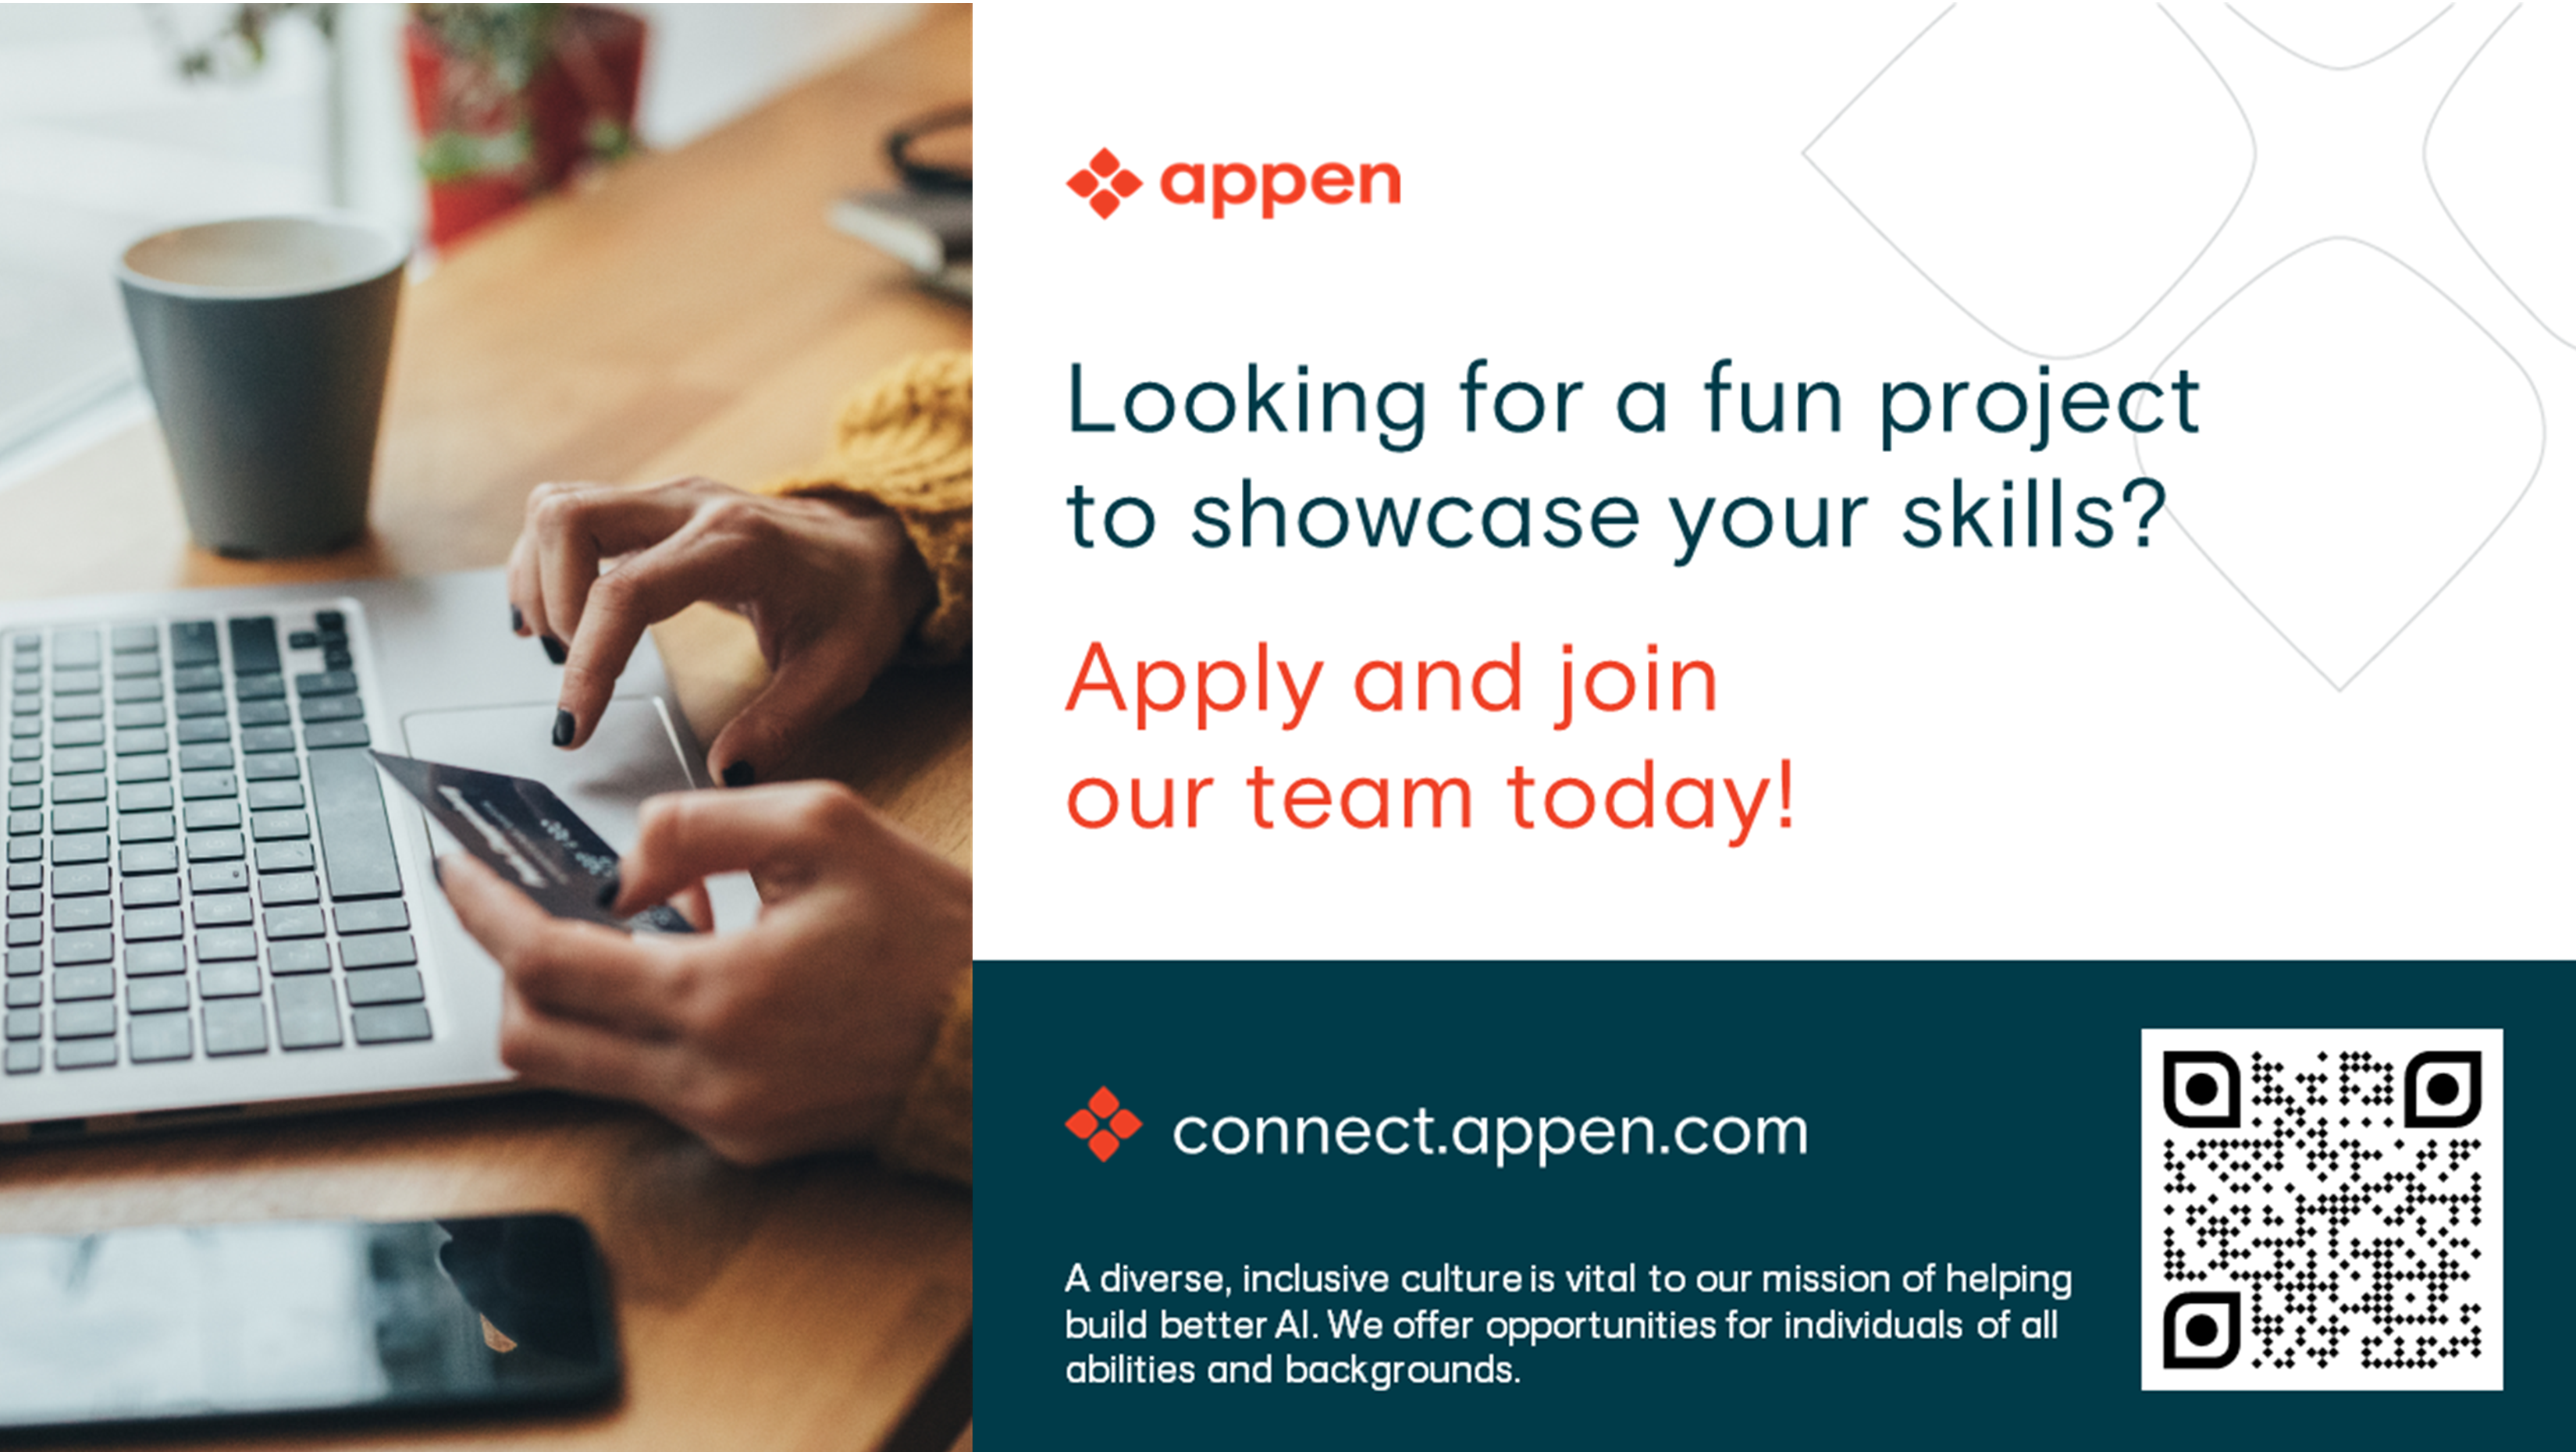 LCCCCCCCCooein ns

ol

[11s
||.

LULL

TU

LCL

(LLLLL

il
([LLLLLEE
I,

LIL
[ [IL
&
[iL

LL
L

 

 

 
  
    
   
   

 

<* appen
Looking for a fun project
to showcase your skills?

Apply and join
our team today!

 
     

connect.appen.com

A diverse, inclusive culture is vital to our mission of helping

build better Al. We offer opportunities for individuals of all
abilities and backgrounds.